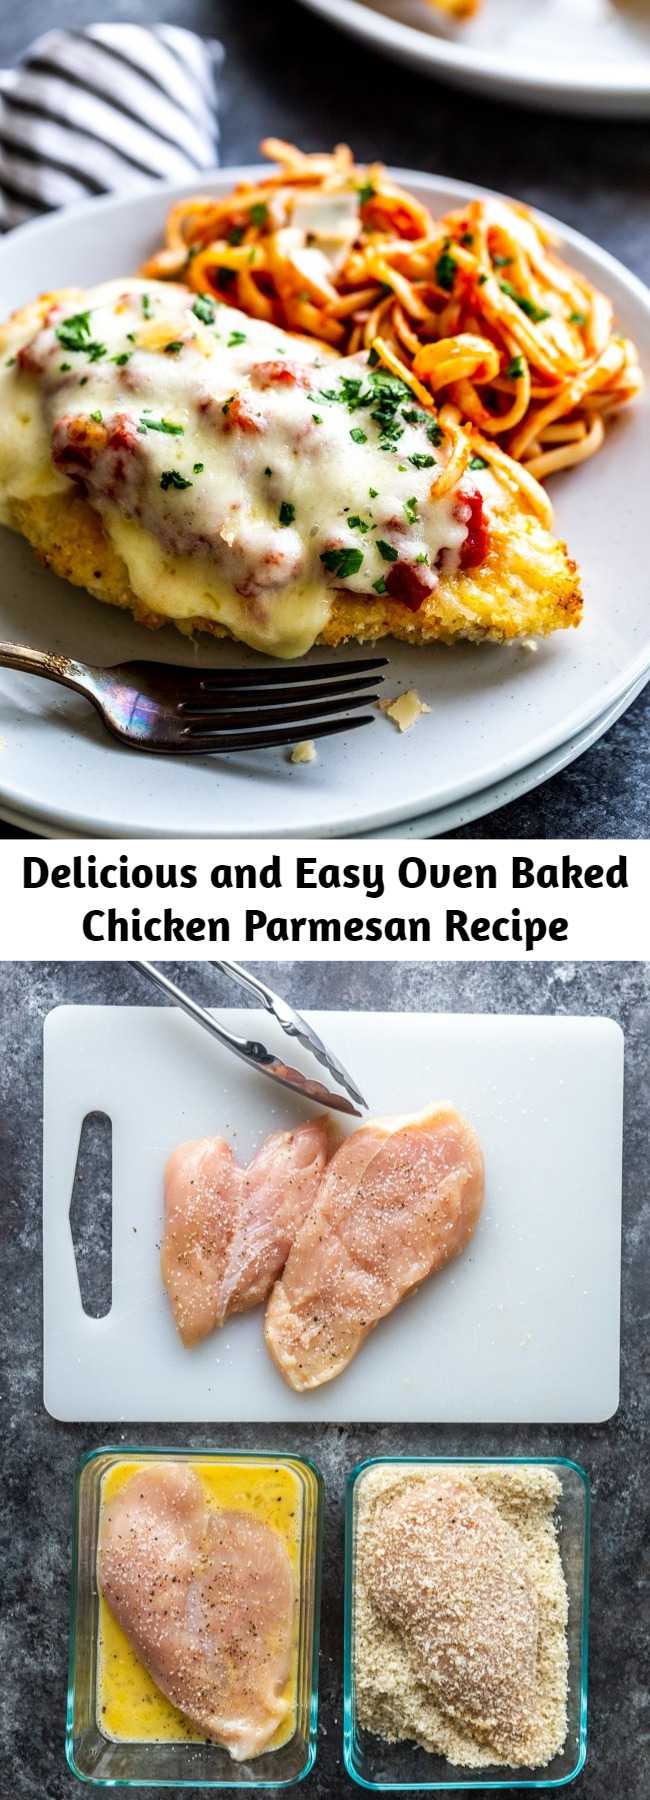 Delicious and Easy Oven Baked Chicken Parmesan Recipe - This delicious Oven Baked Chicken Parmesan recipe is easy and doesn't require any frying. Because this chicken Parmesan is baked, it is healthy, quick and easy! Make this crispy baked Parmesan crusted chicken for dinner tonight in about thirty minutes!